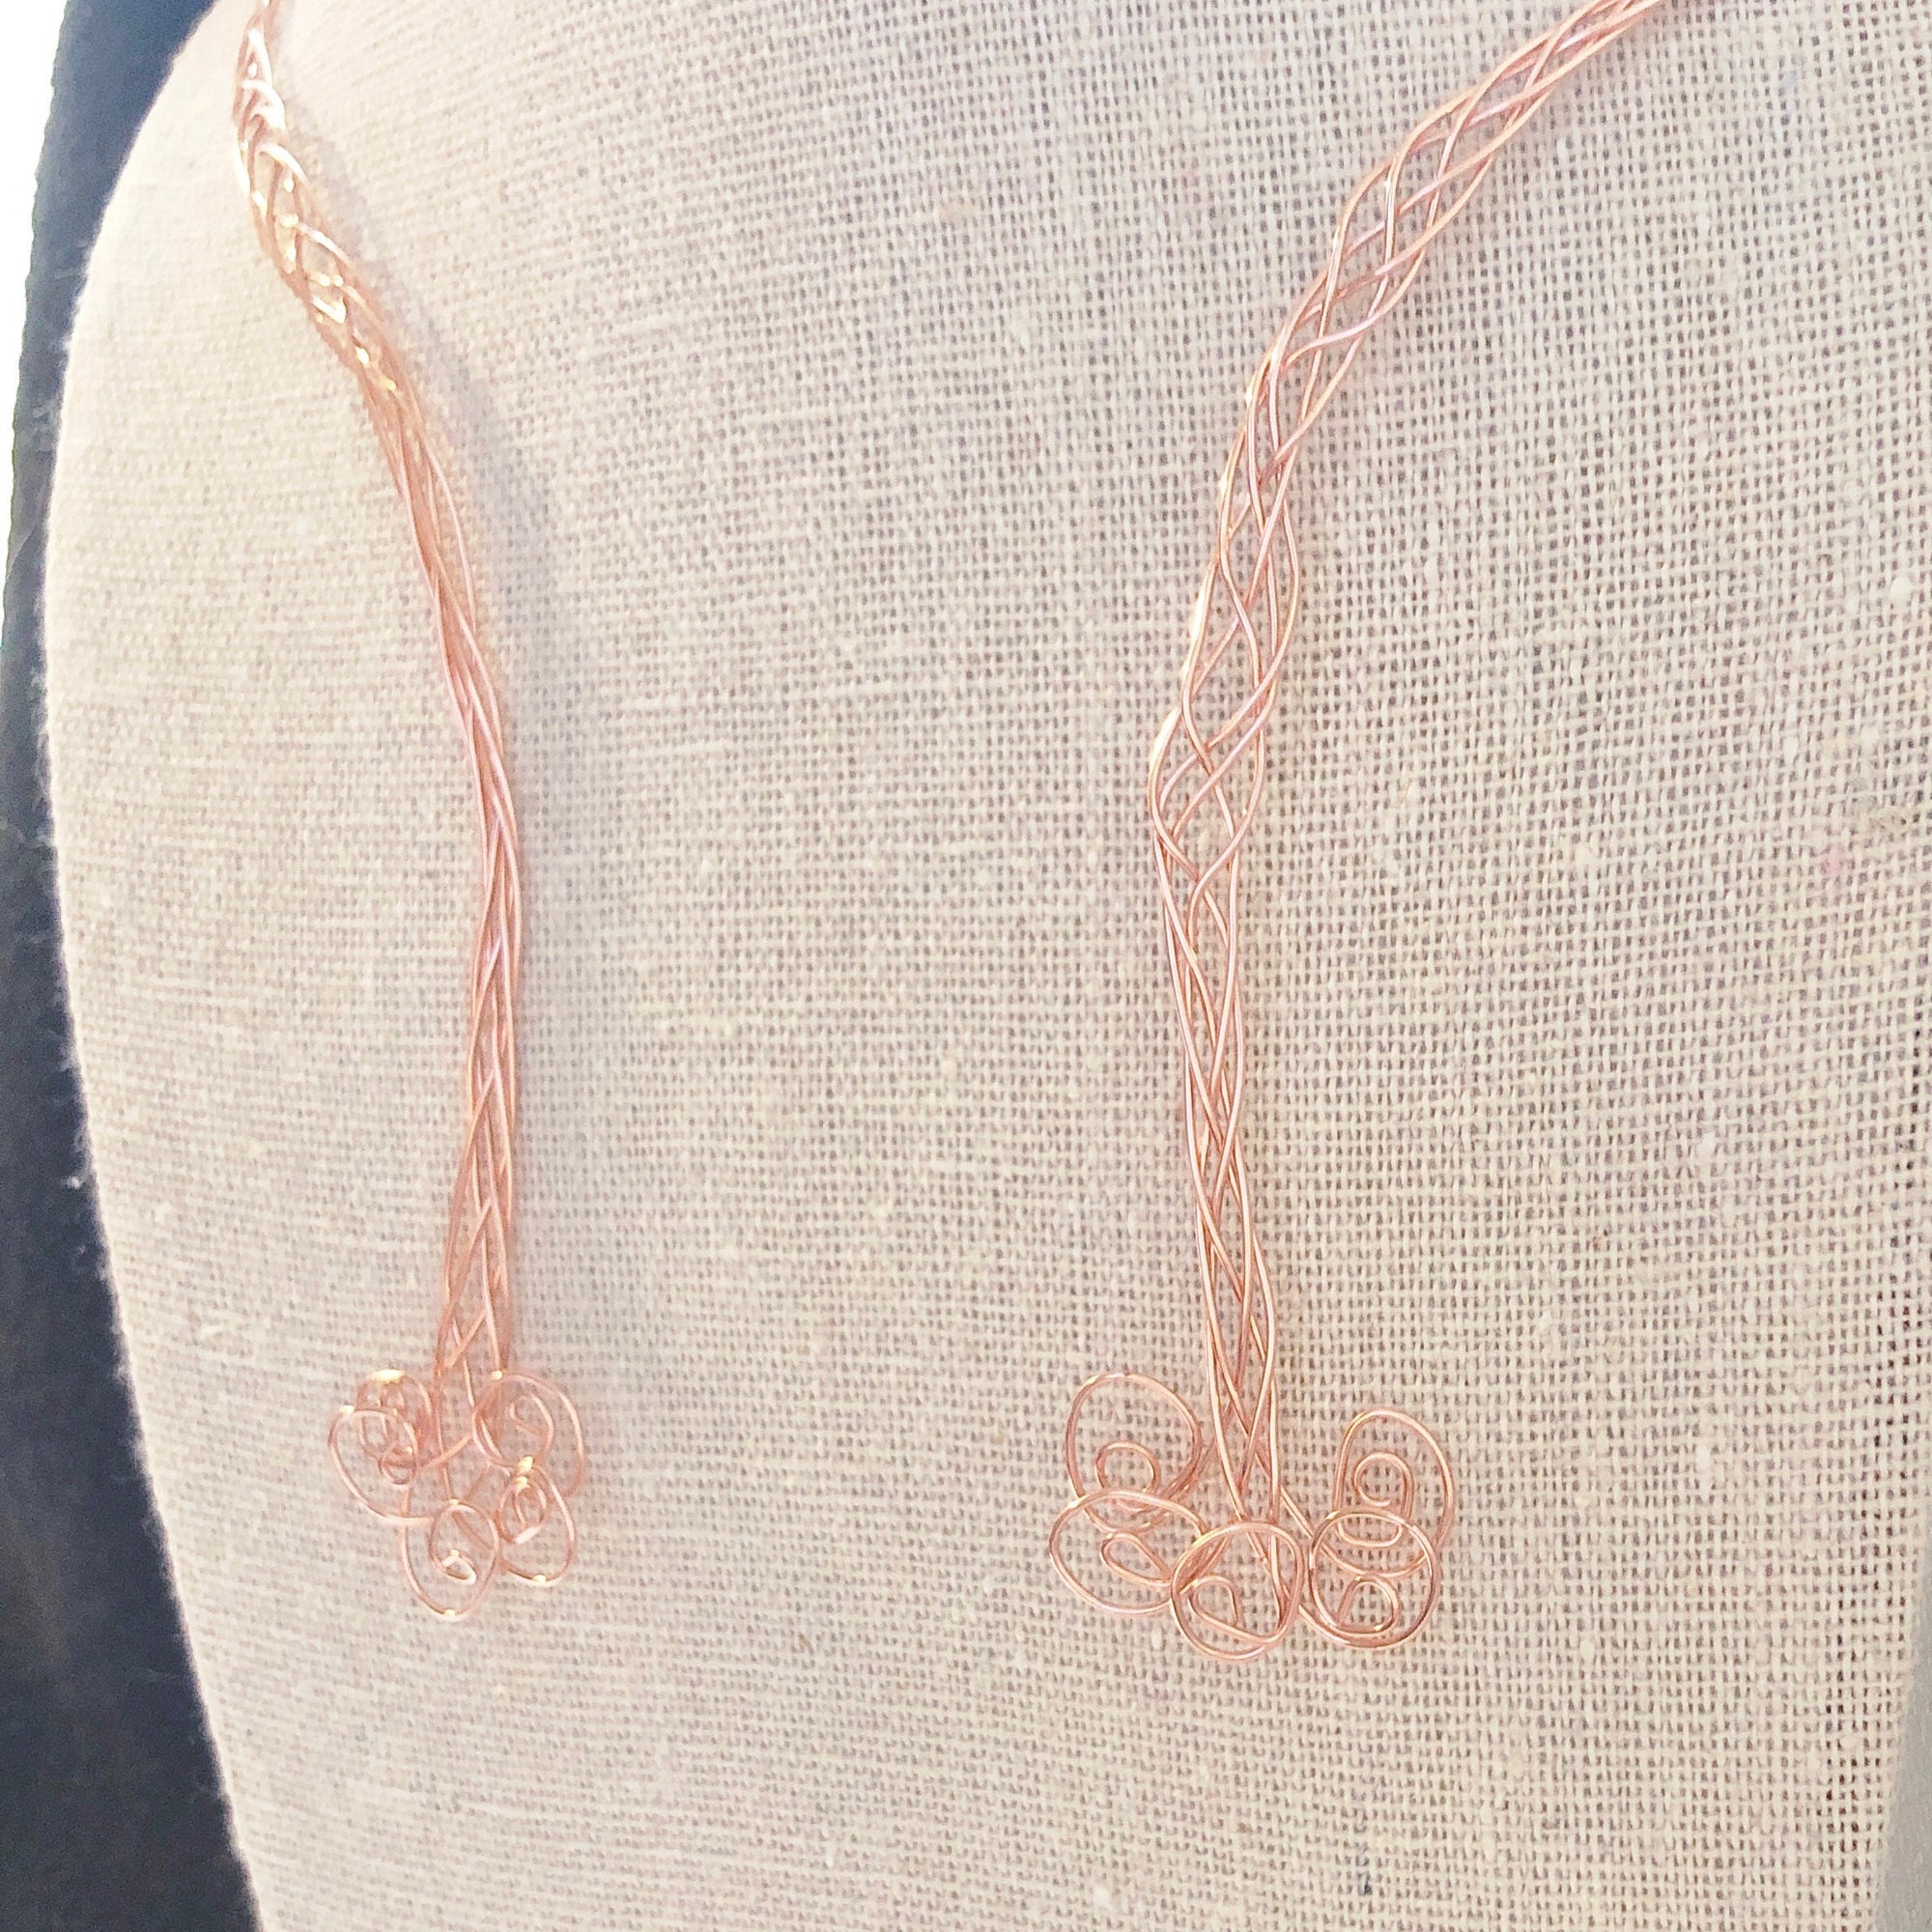 Copper Viking necklace, Celtic knot collar necklace, Norse jewelry Choker necklace for women, Copper woven necklace, Dainty Celtic jewelry